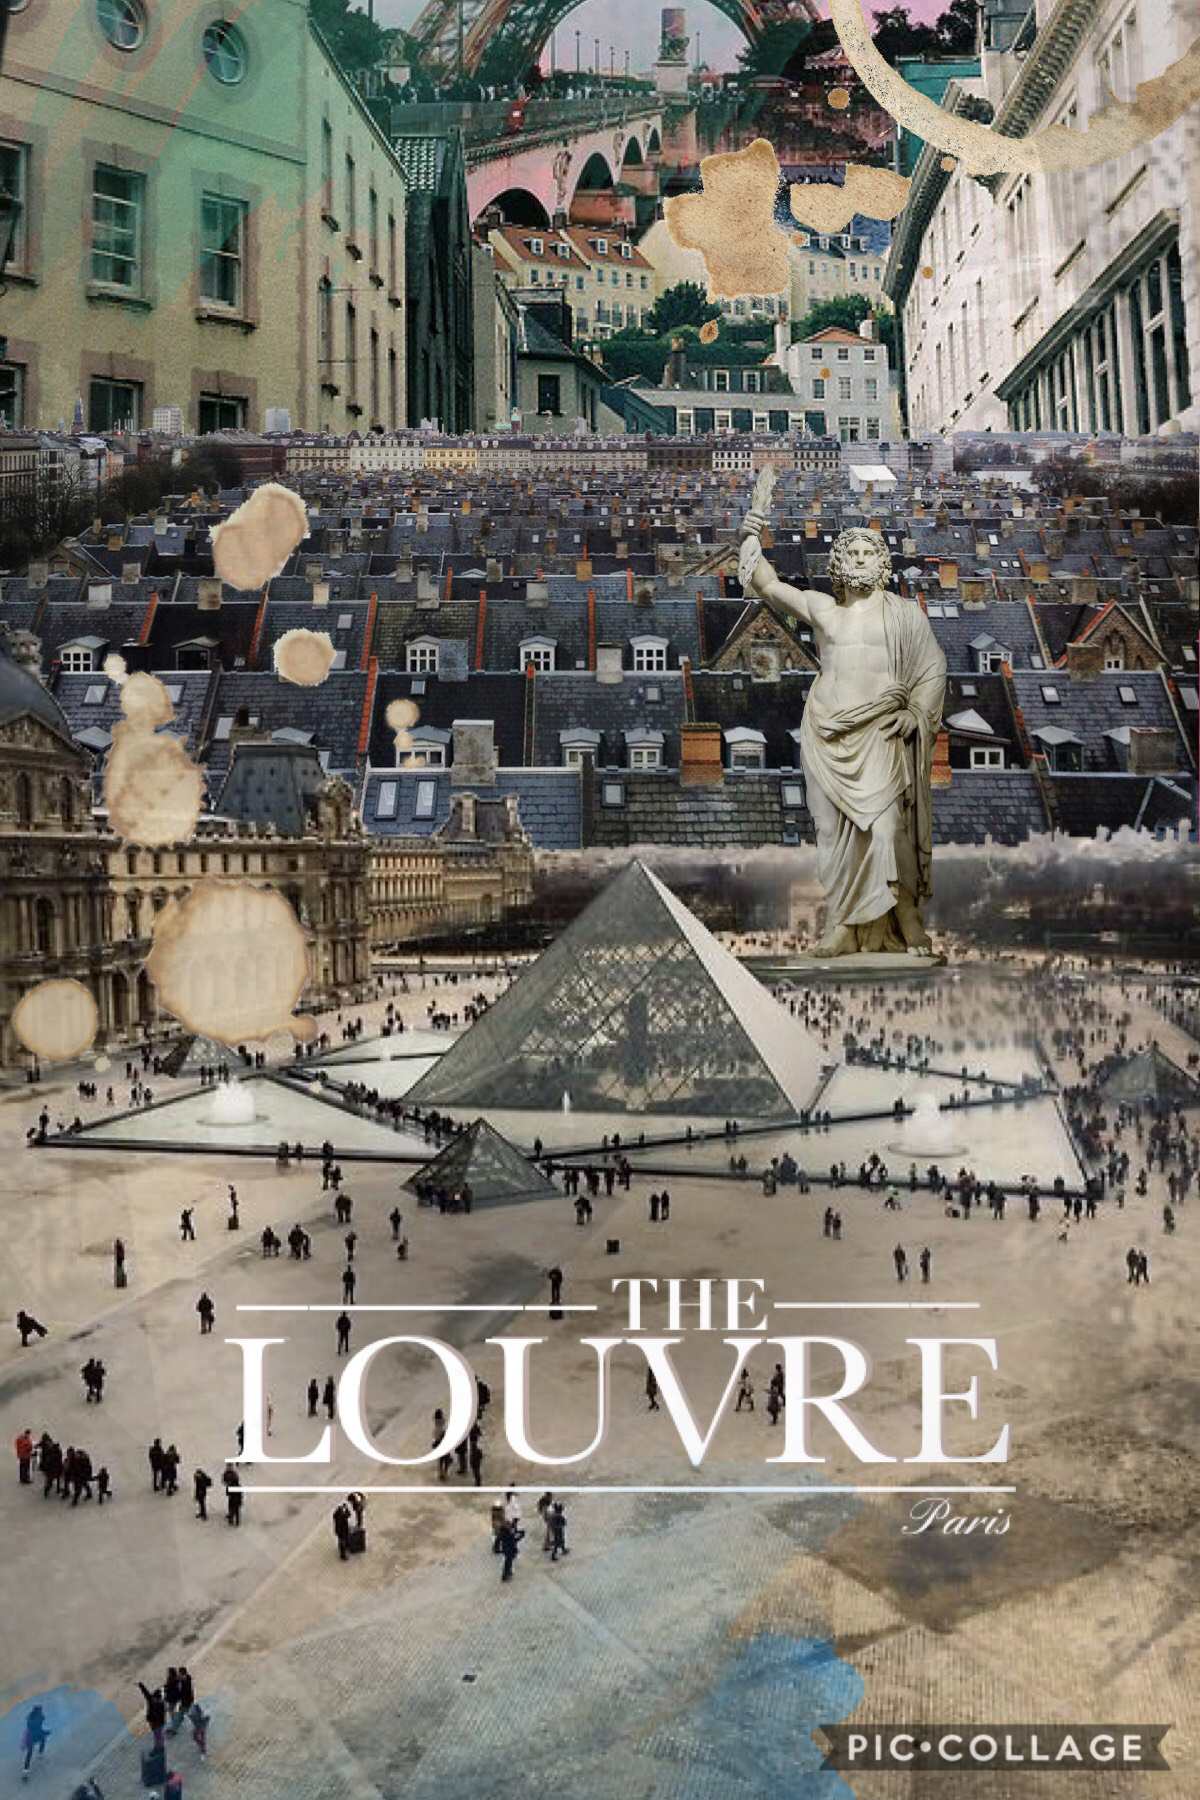 they’ll hang us in the louvre! (down the back, but who cares? still the louvre) HEY GUYS I STILL LIVE WHAT’s GOOD